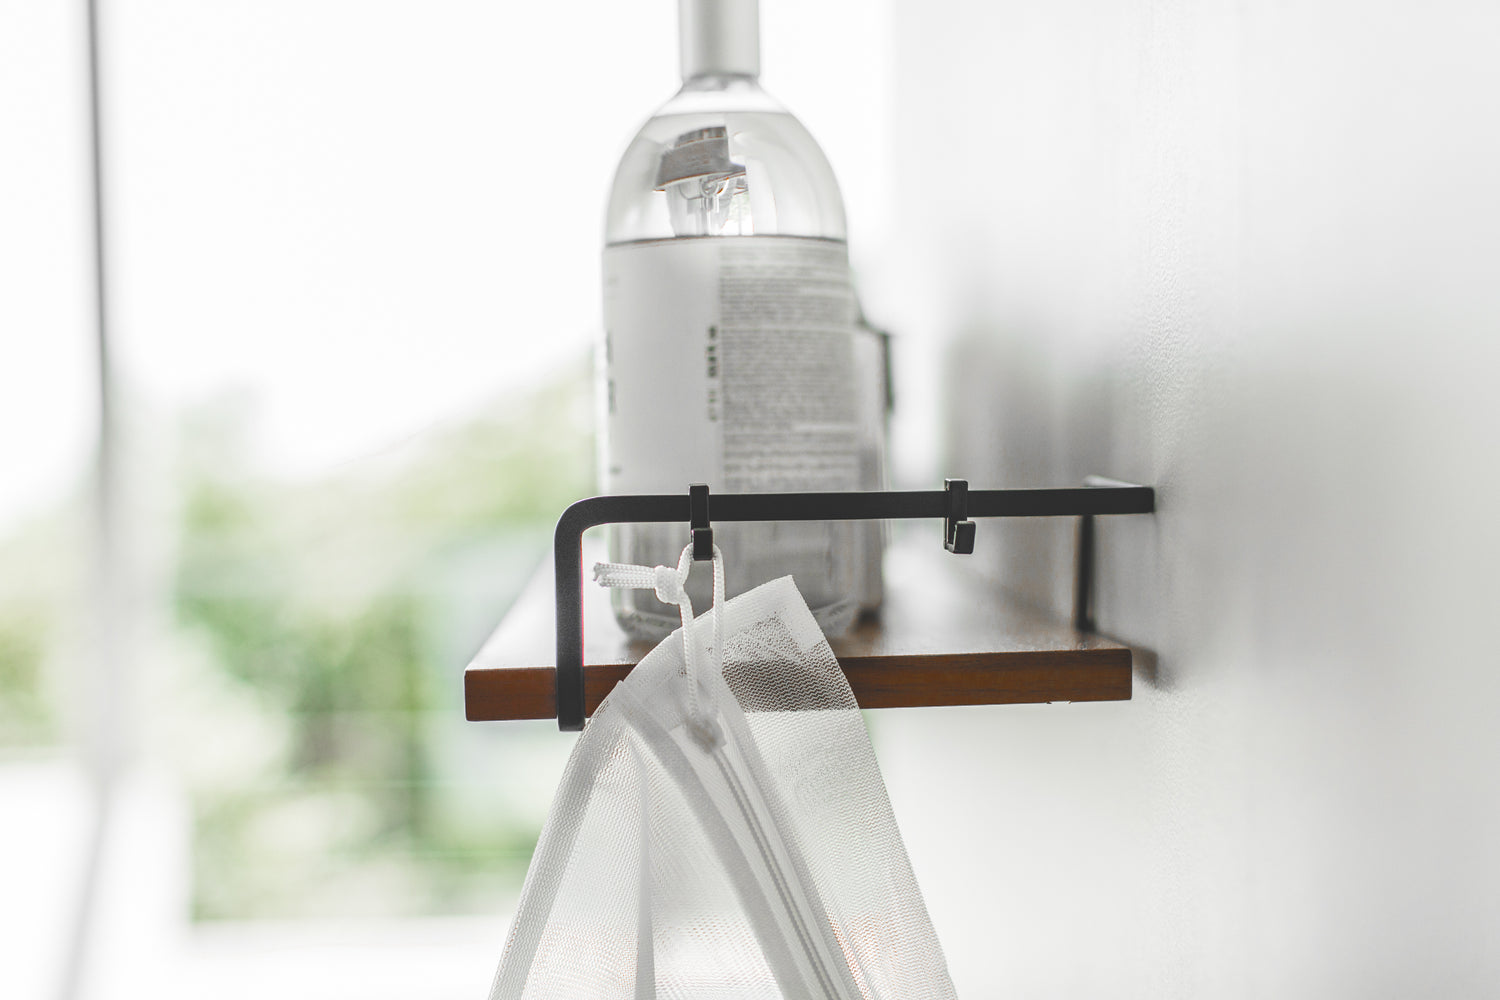 View 8 - Side view of Wall-Mounted Shelf holdling cleaning items and mesh bag by Yamazaki Home.